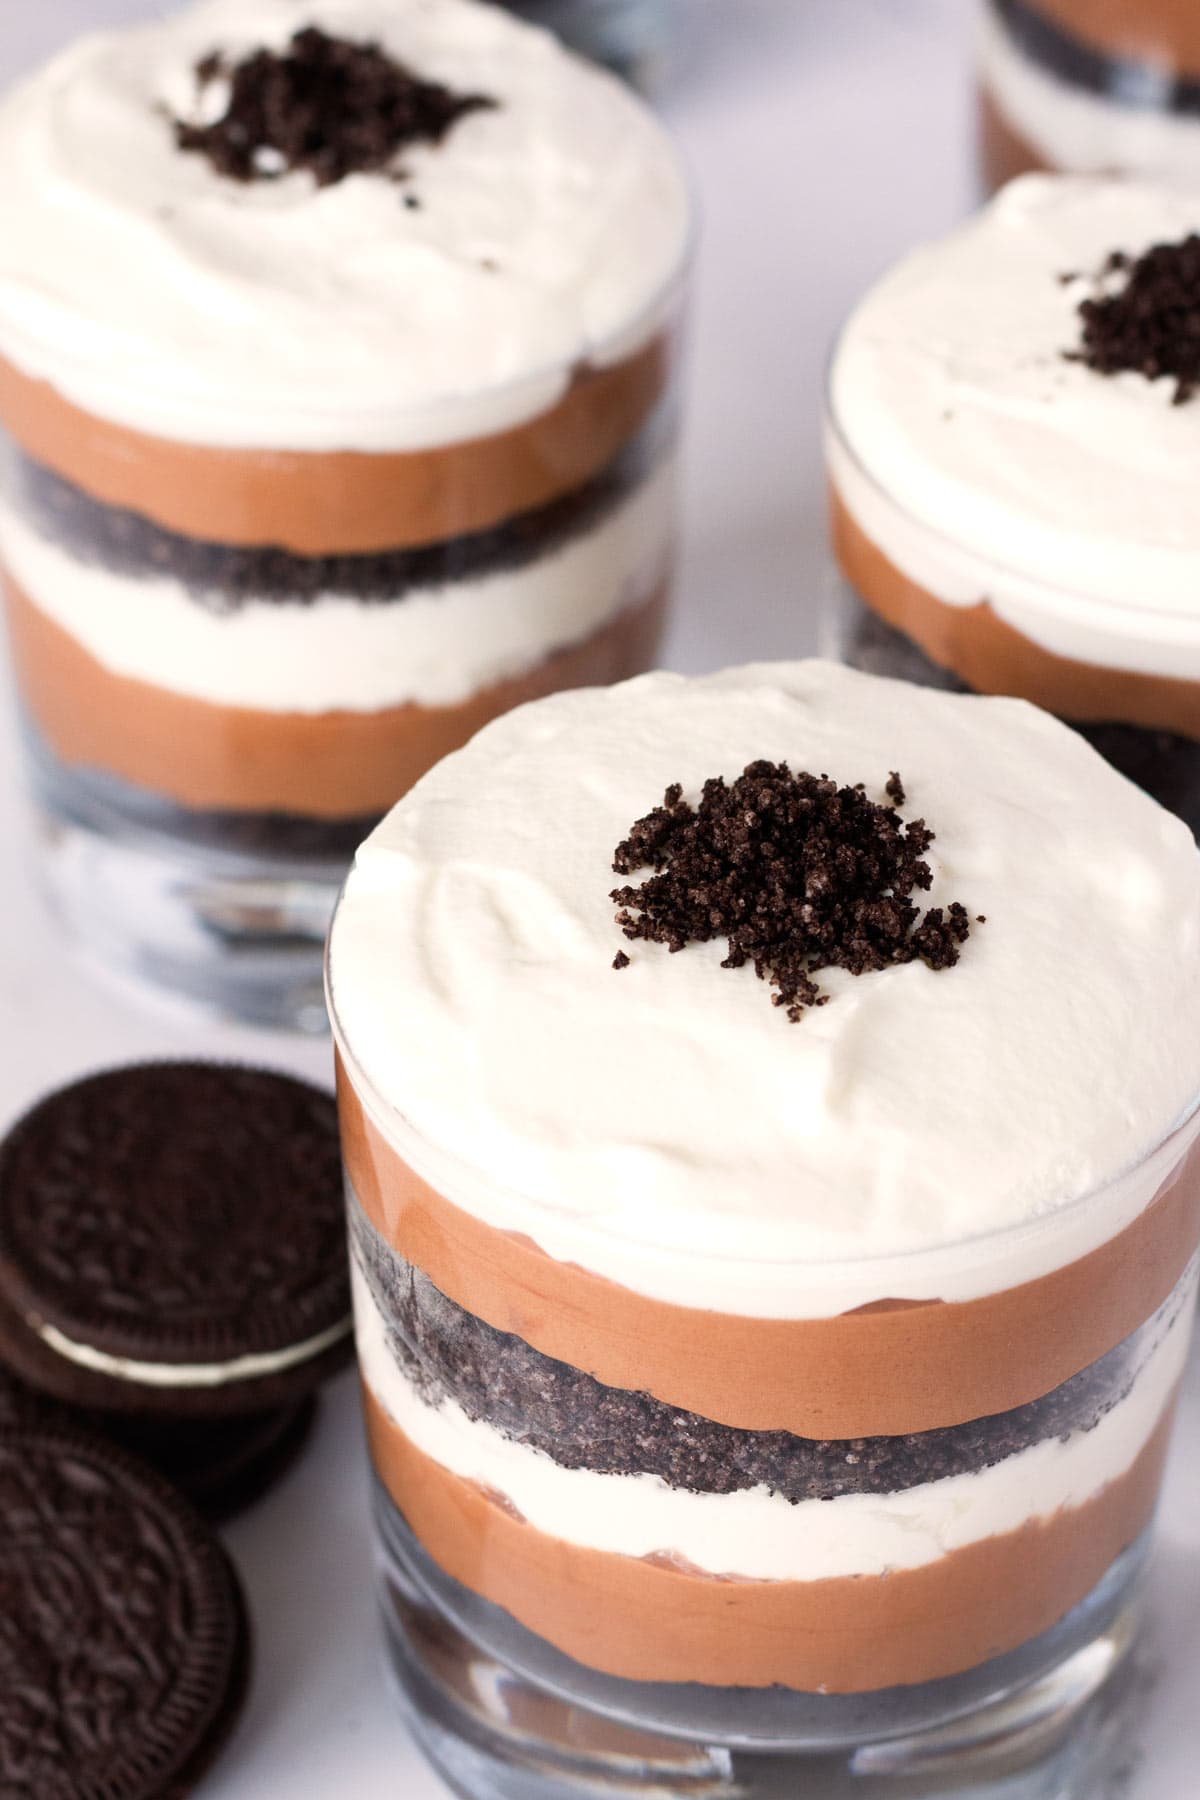 Chocolate parfaits with oreo crumbs on top and whole oreo cookies on counter.